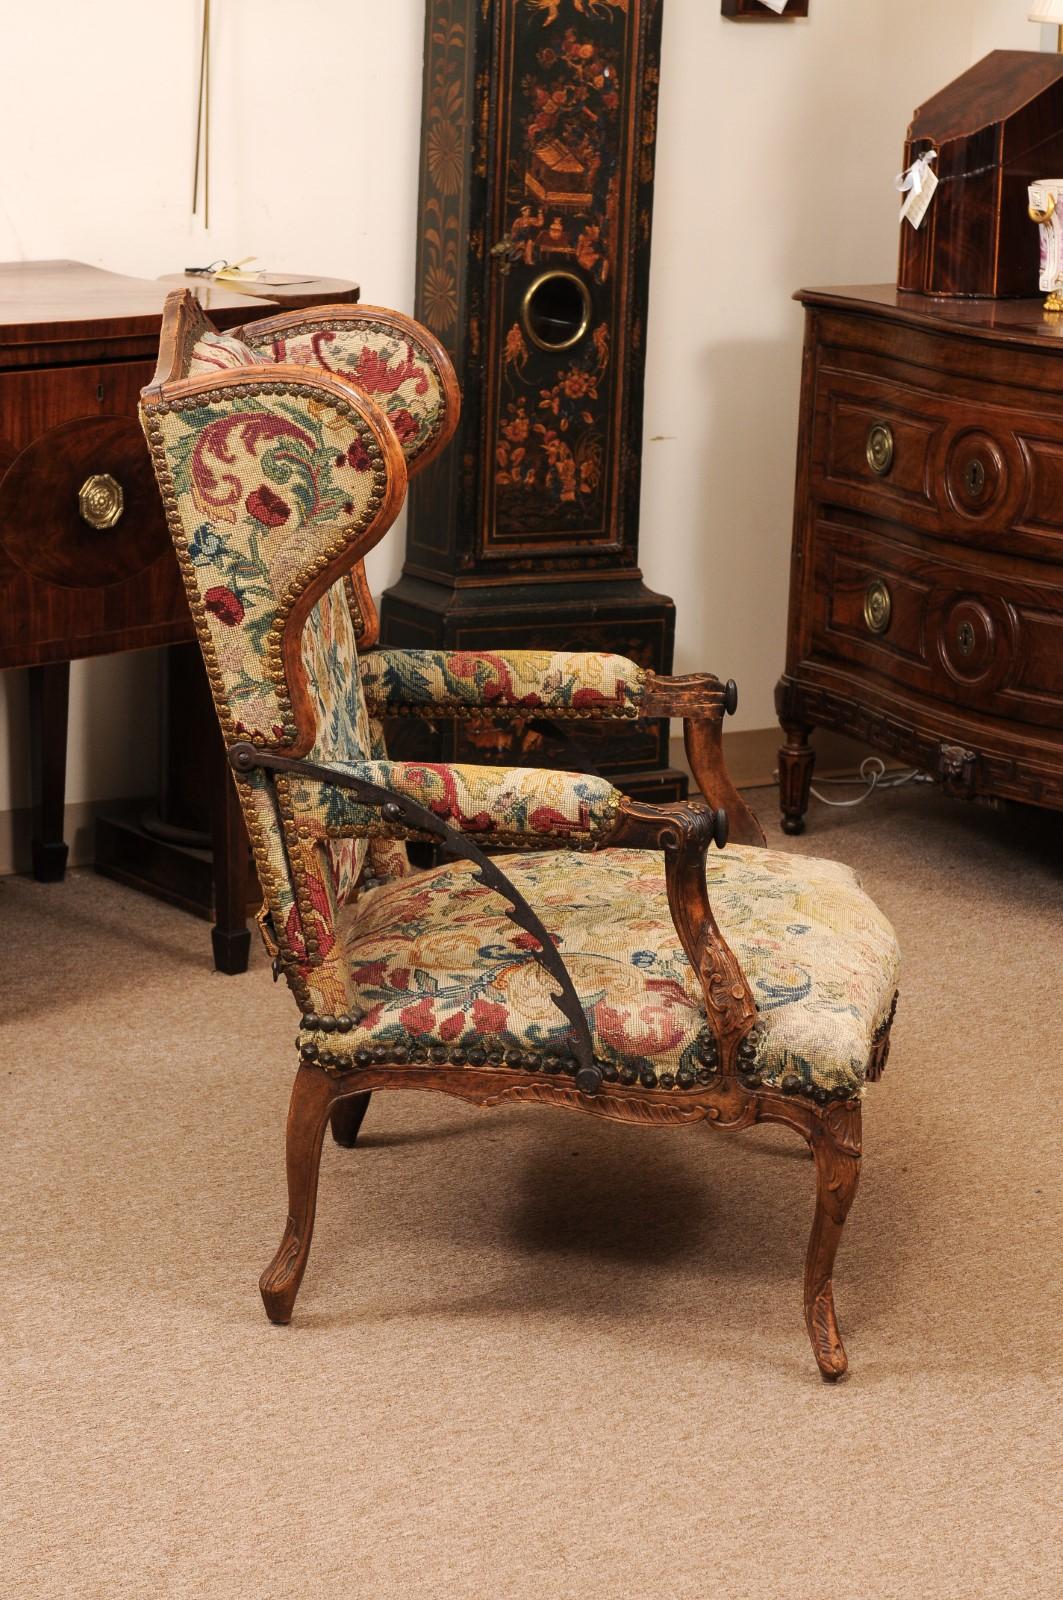 Early 18th Century French Regence Period Walnut Ratchet Wing Chair with Needlewo For Sale 3